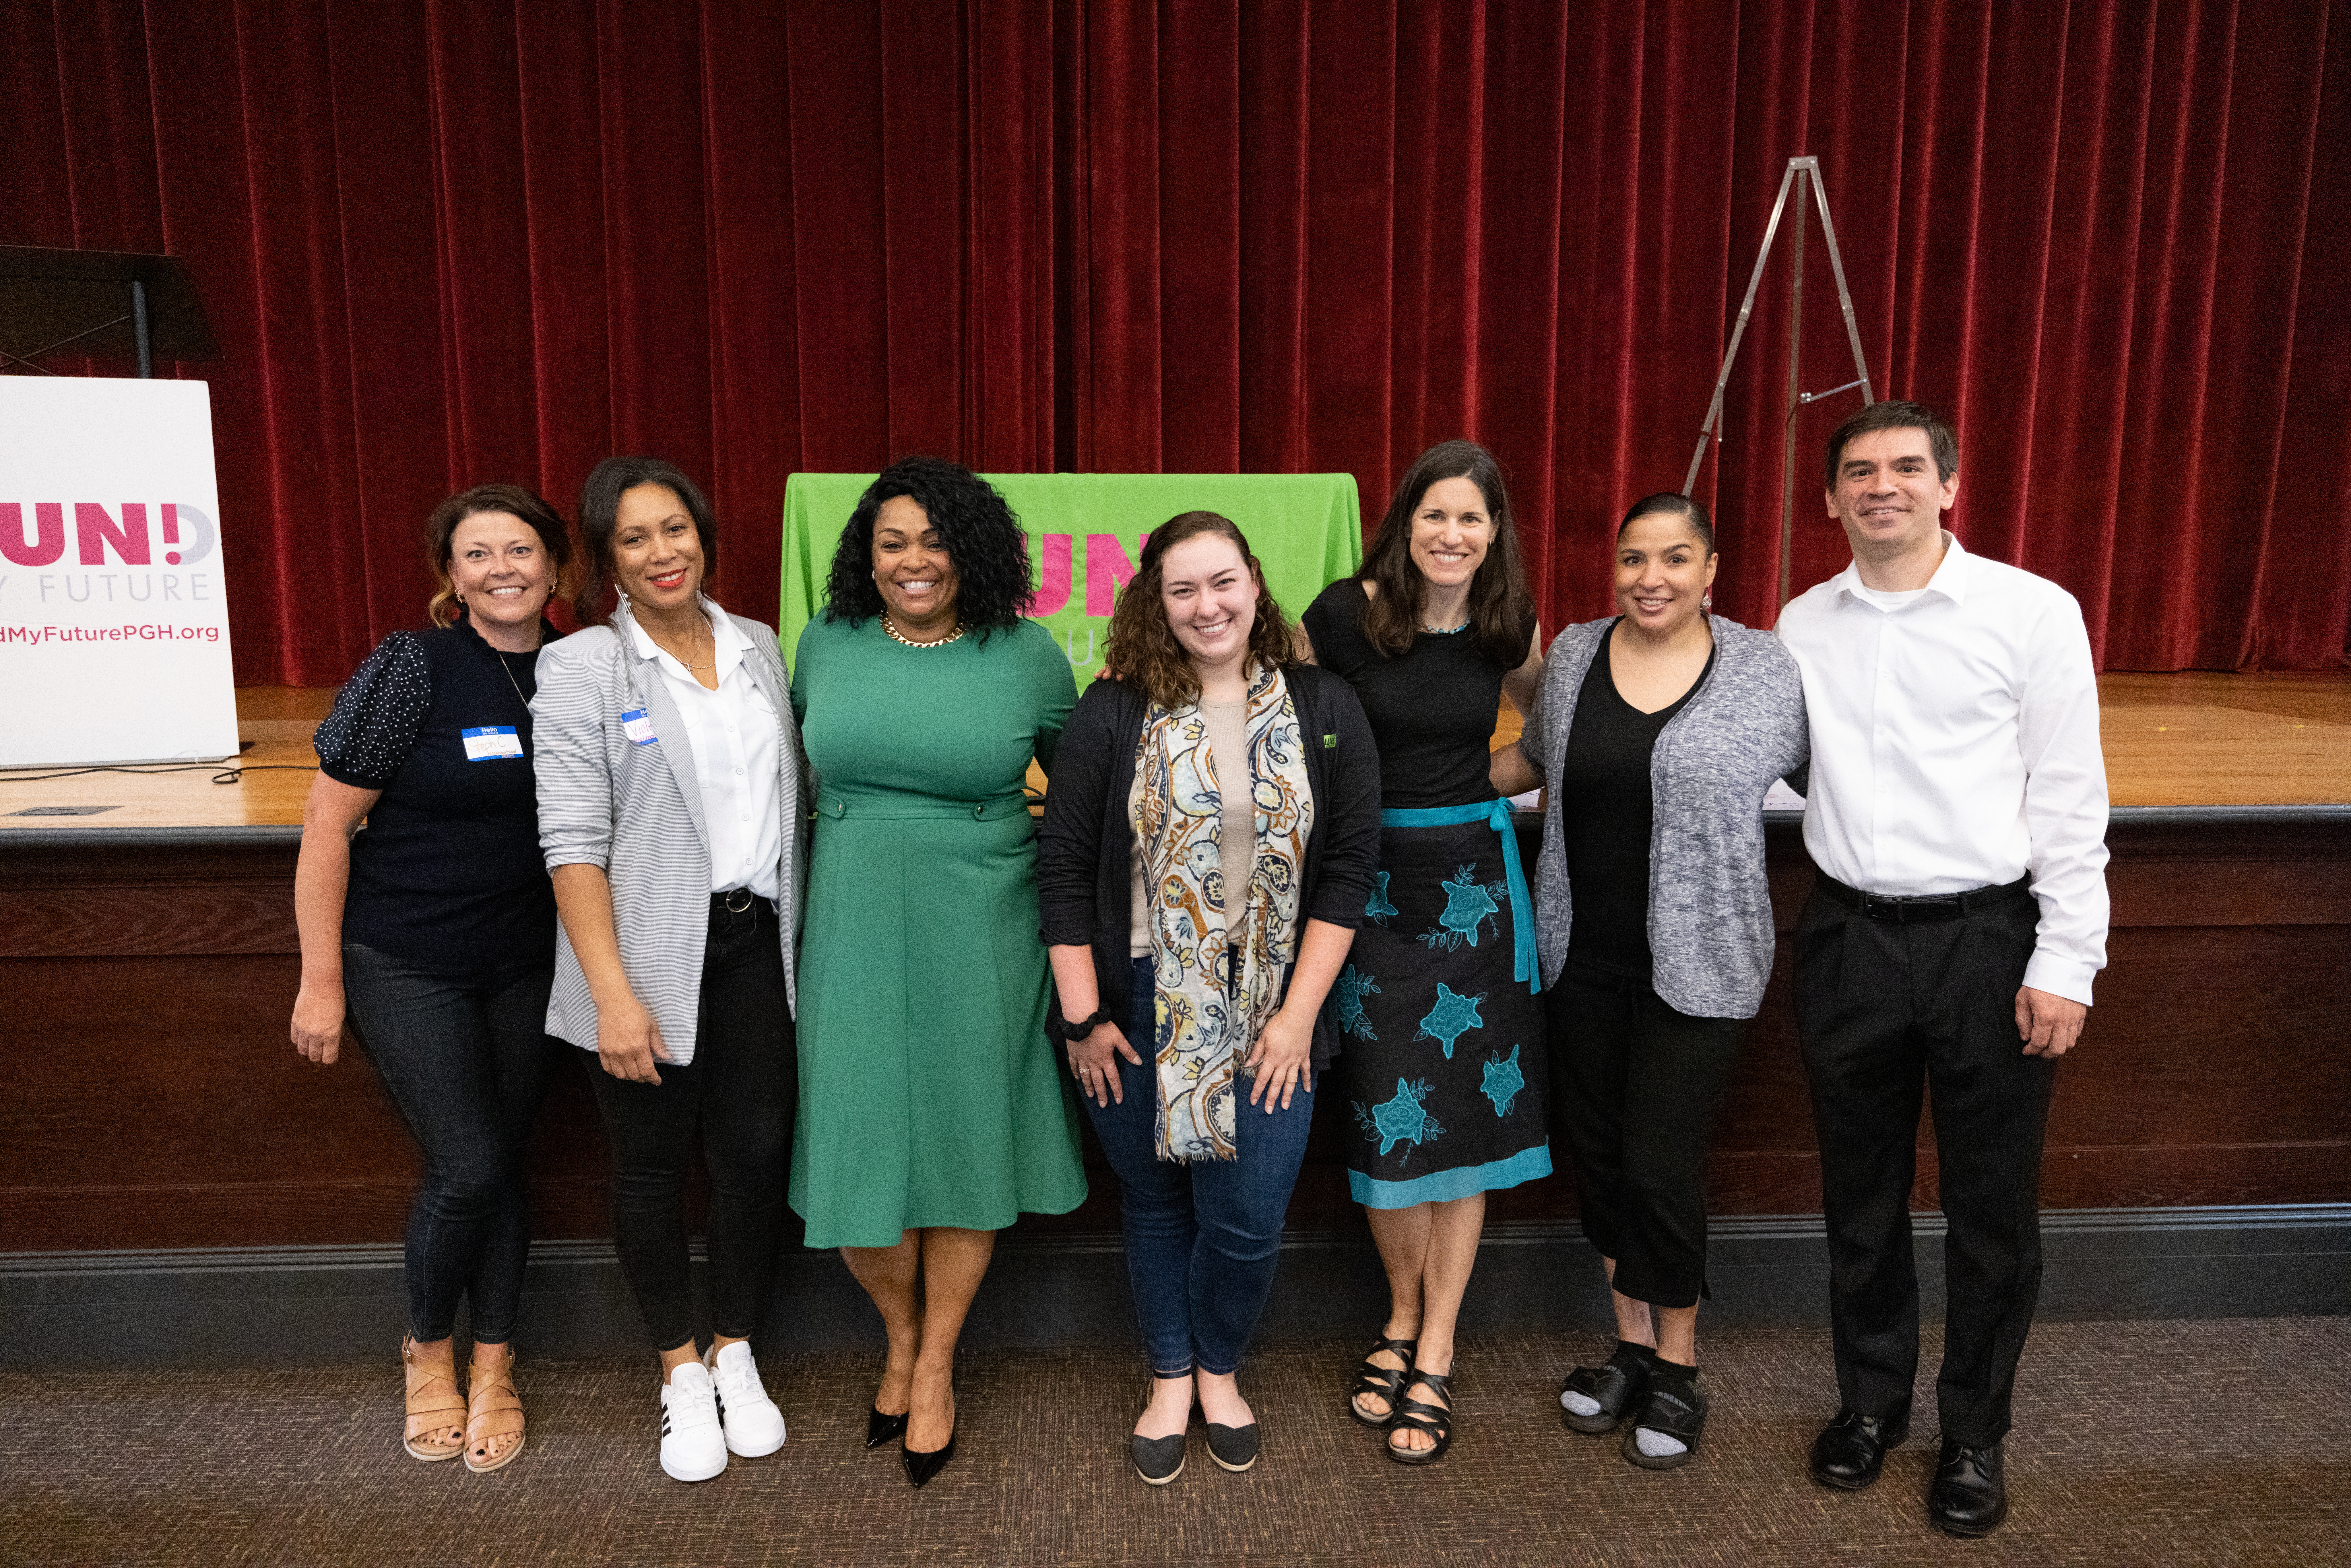 7 Neighborhood Allies staff members - 6 women and 1 man - gather for a posed photo in front of the stage at our annual Fund My Future PGH celebration.